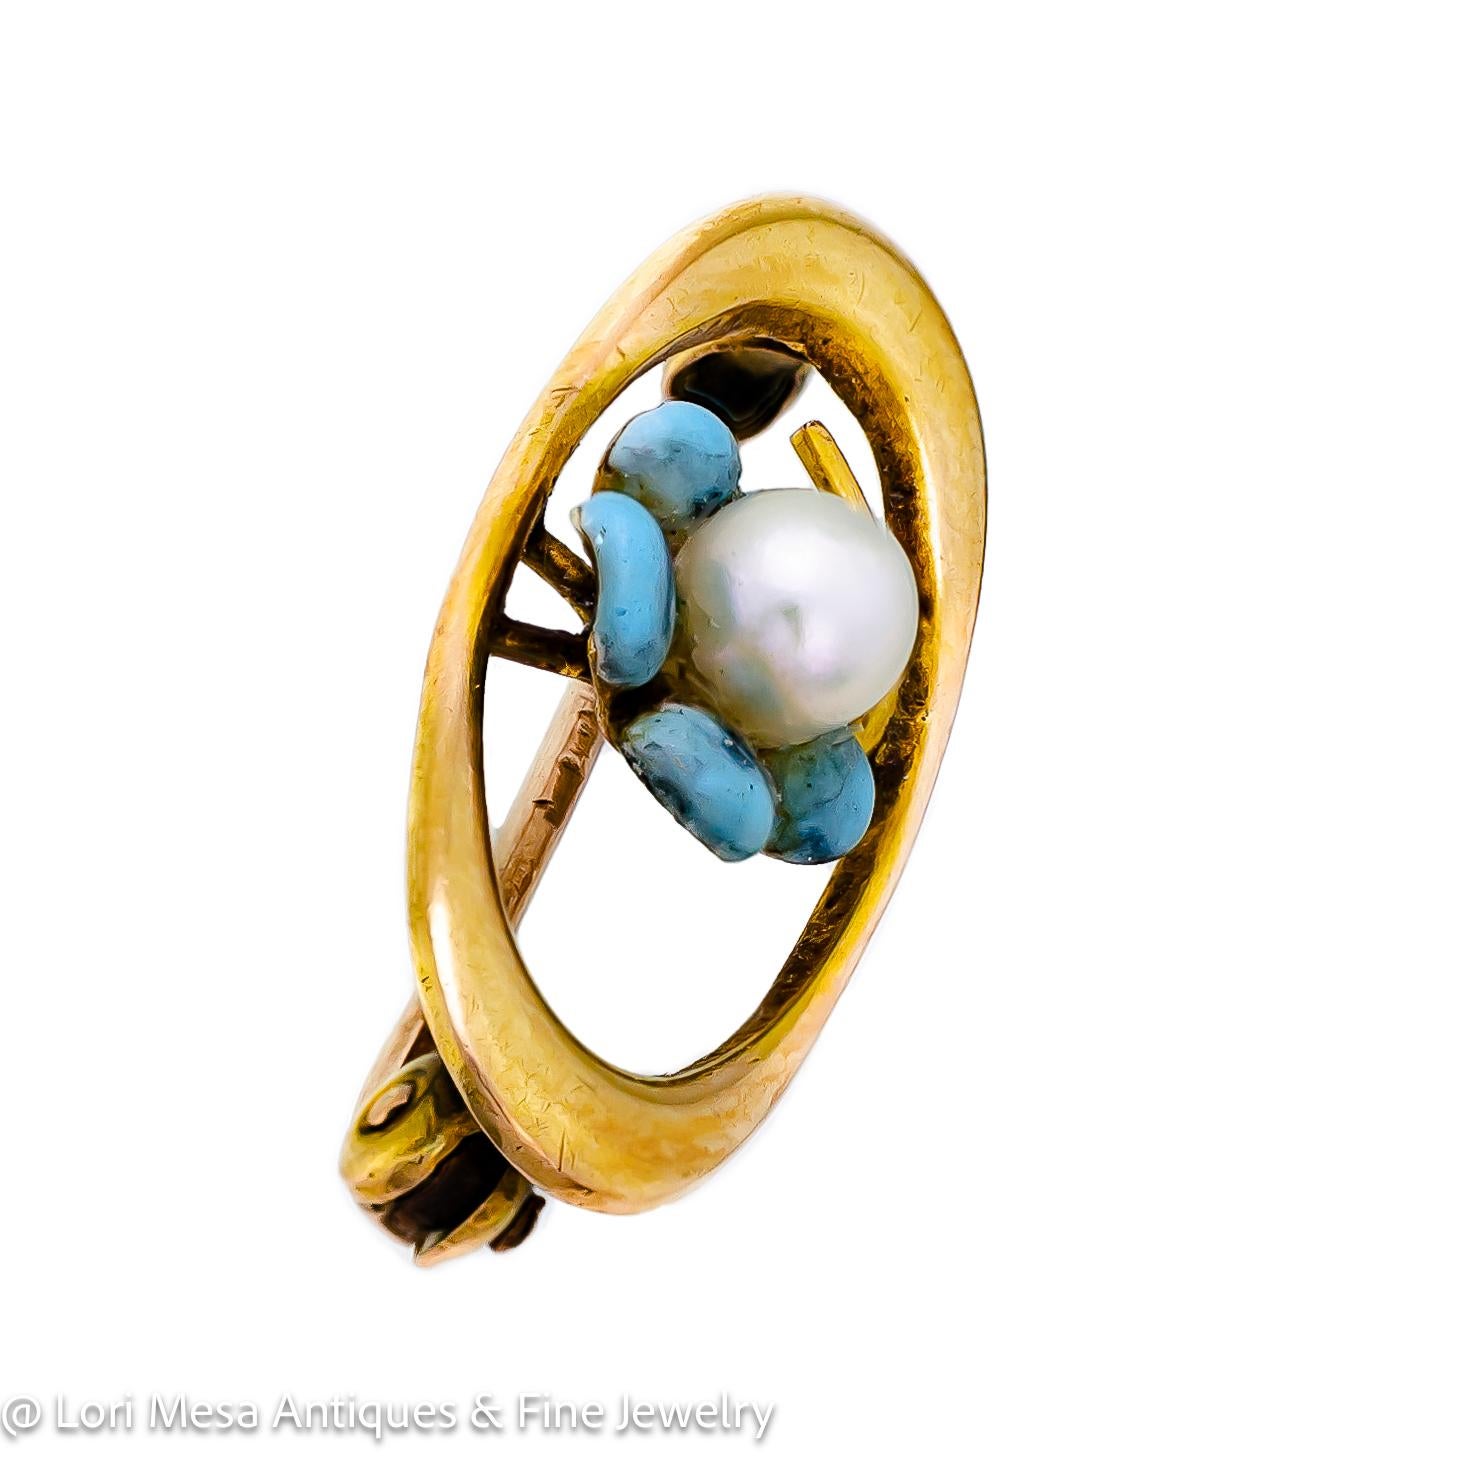 Attractive circa 1900 lady's 10kt yellow gold, blue enamel and pearl 